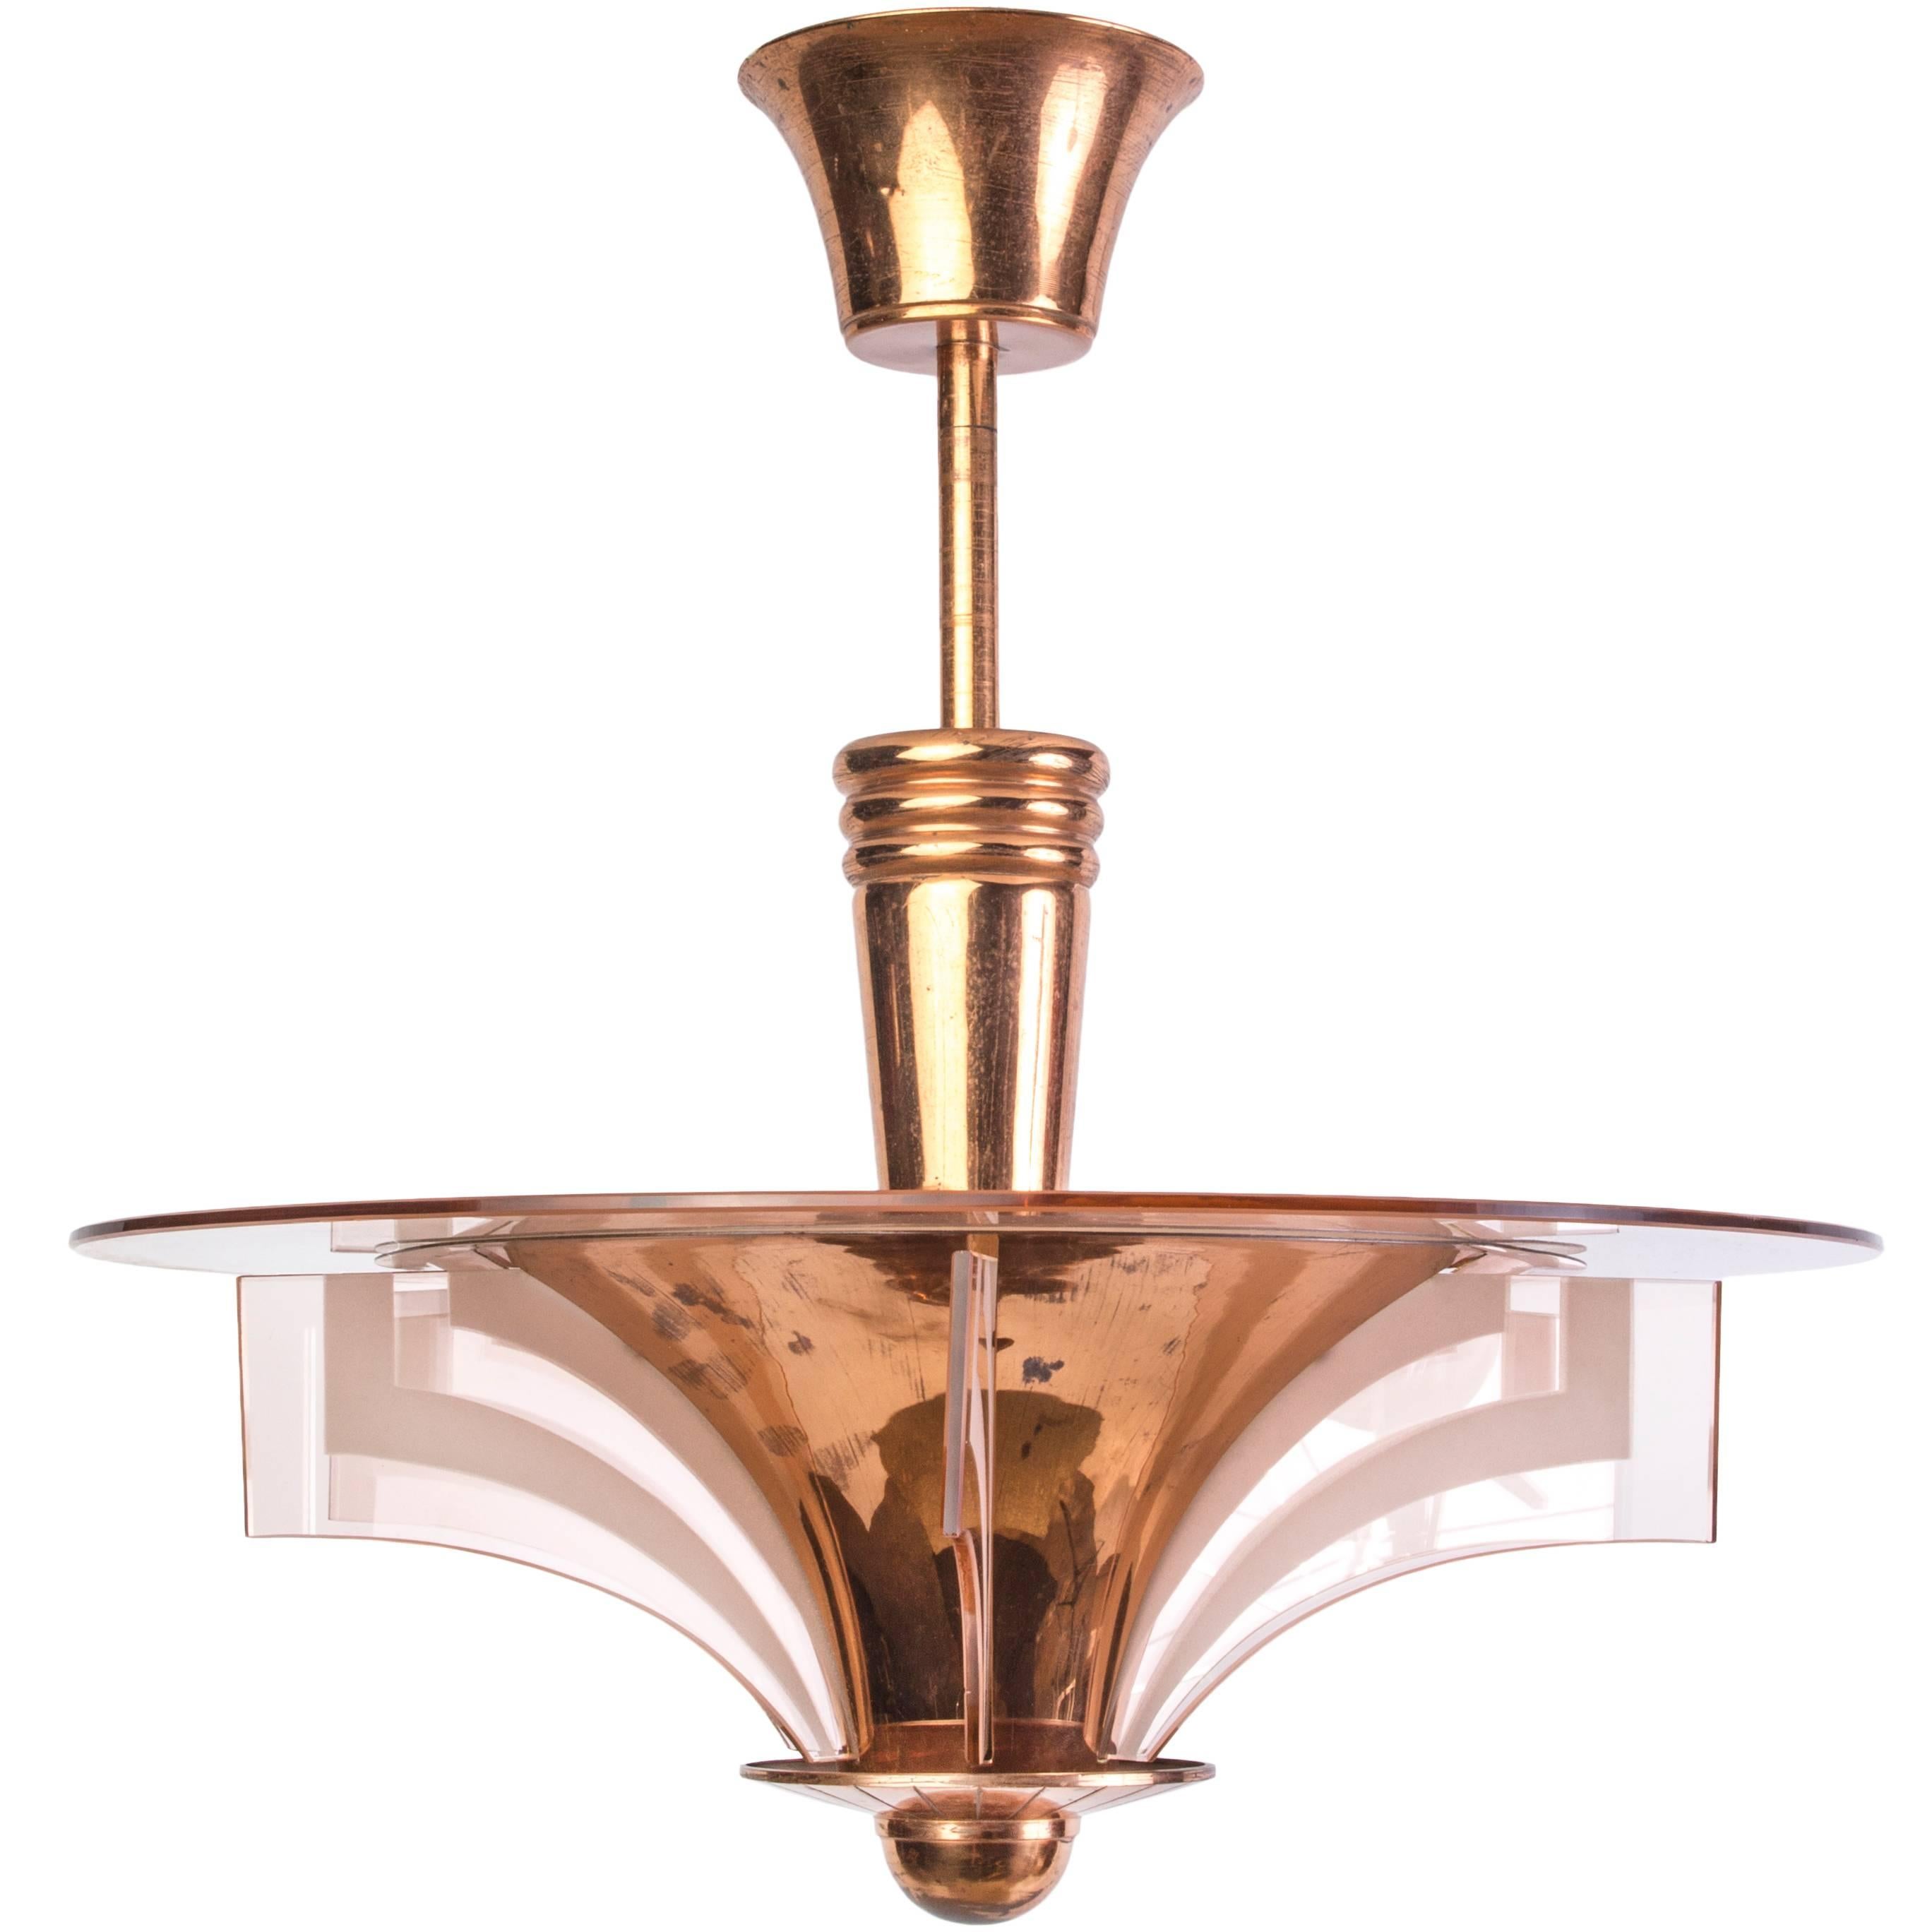 Stunning French Art Deco Chandelier by Petitot